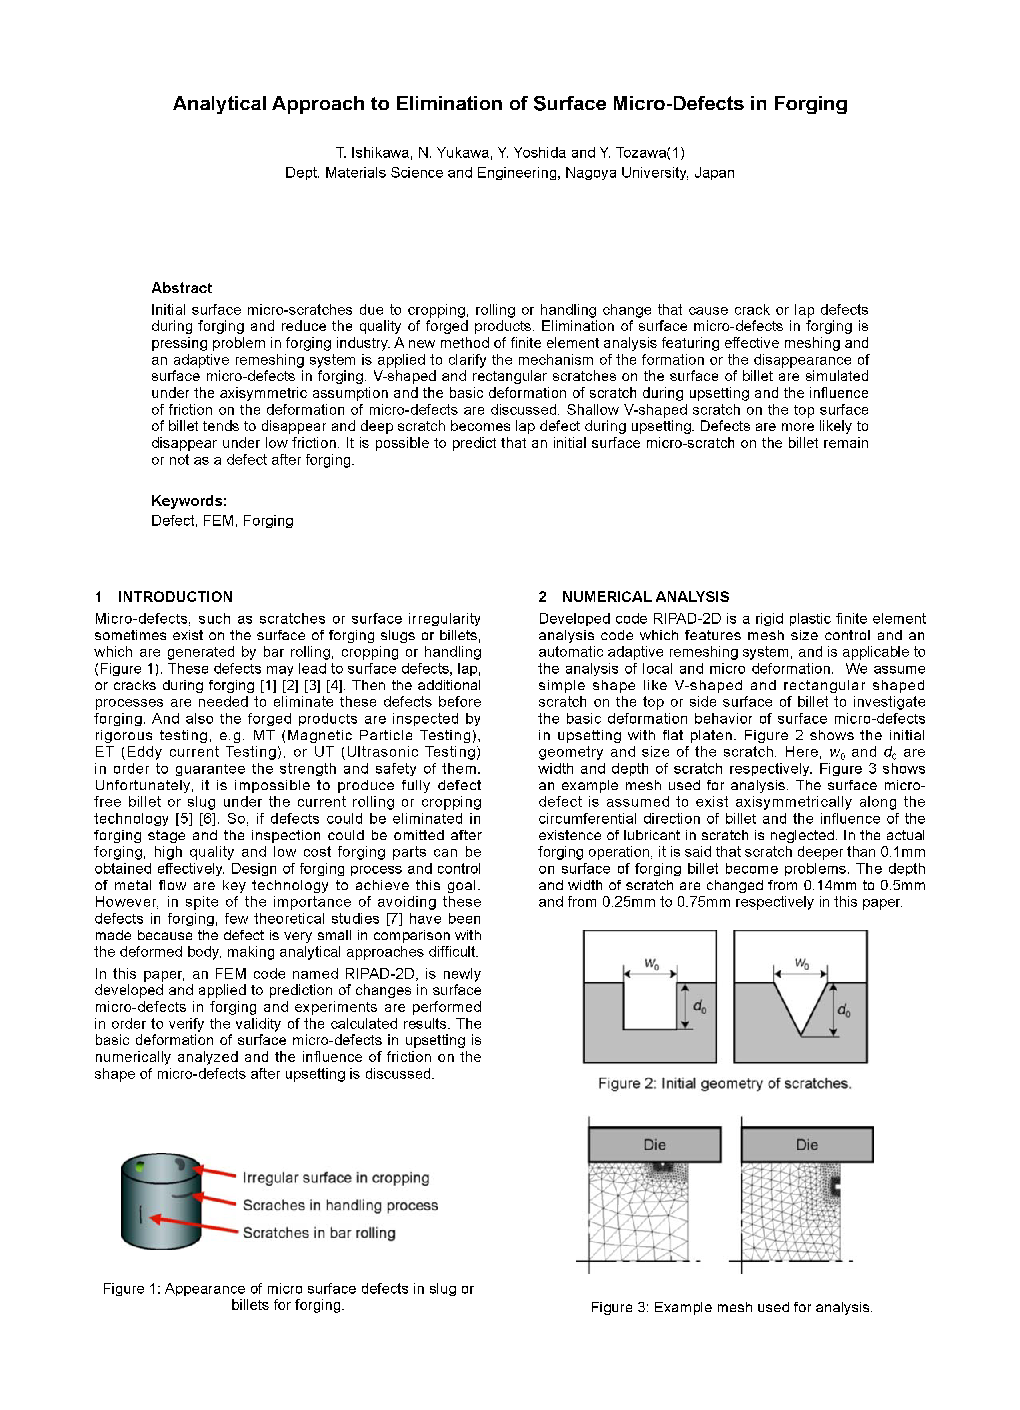 Analytical Approach to Elimination of Surface Micro-Defects in Forging